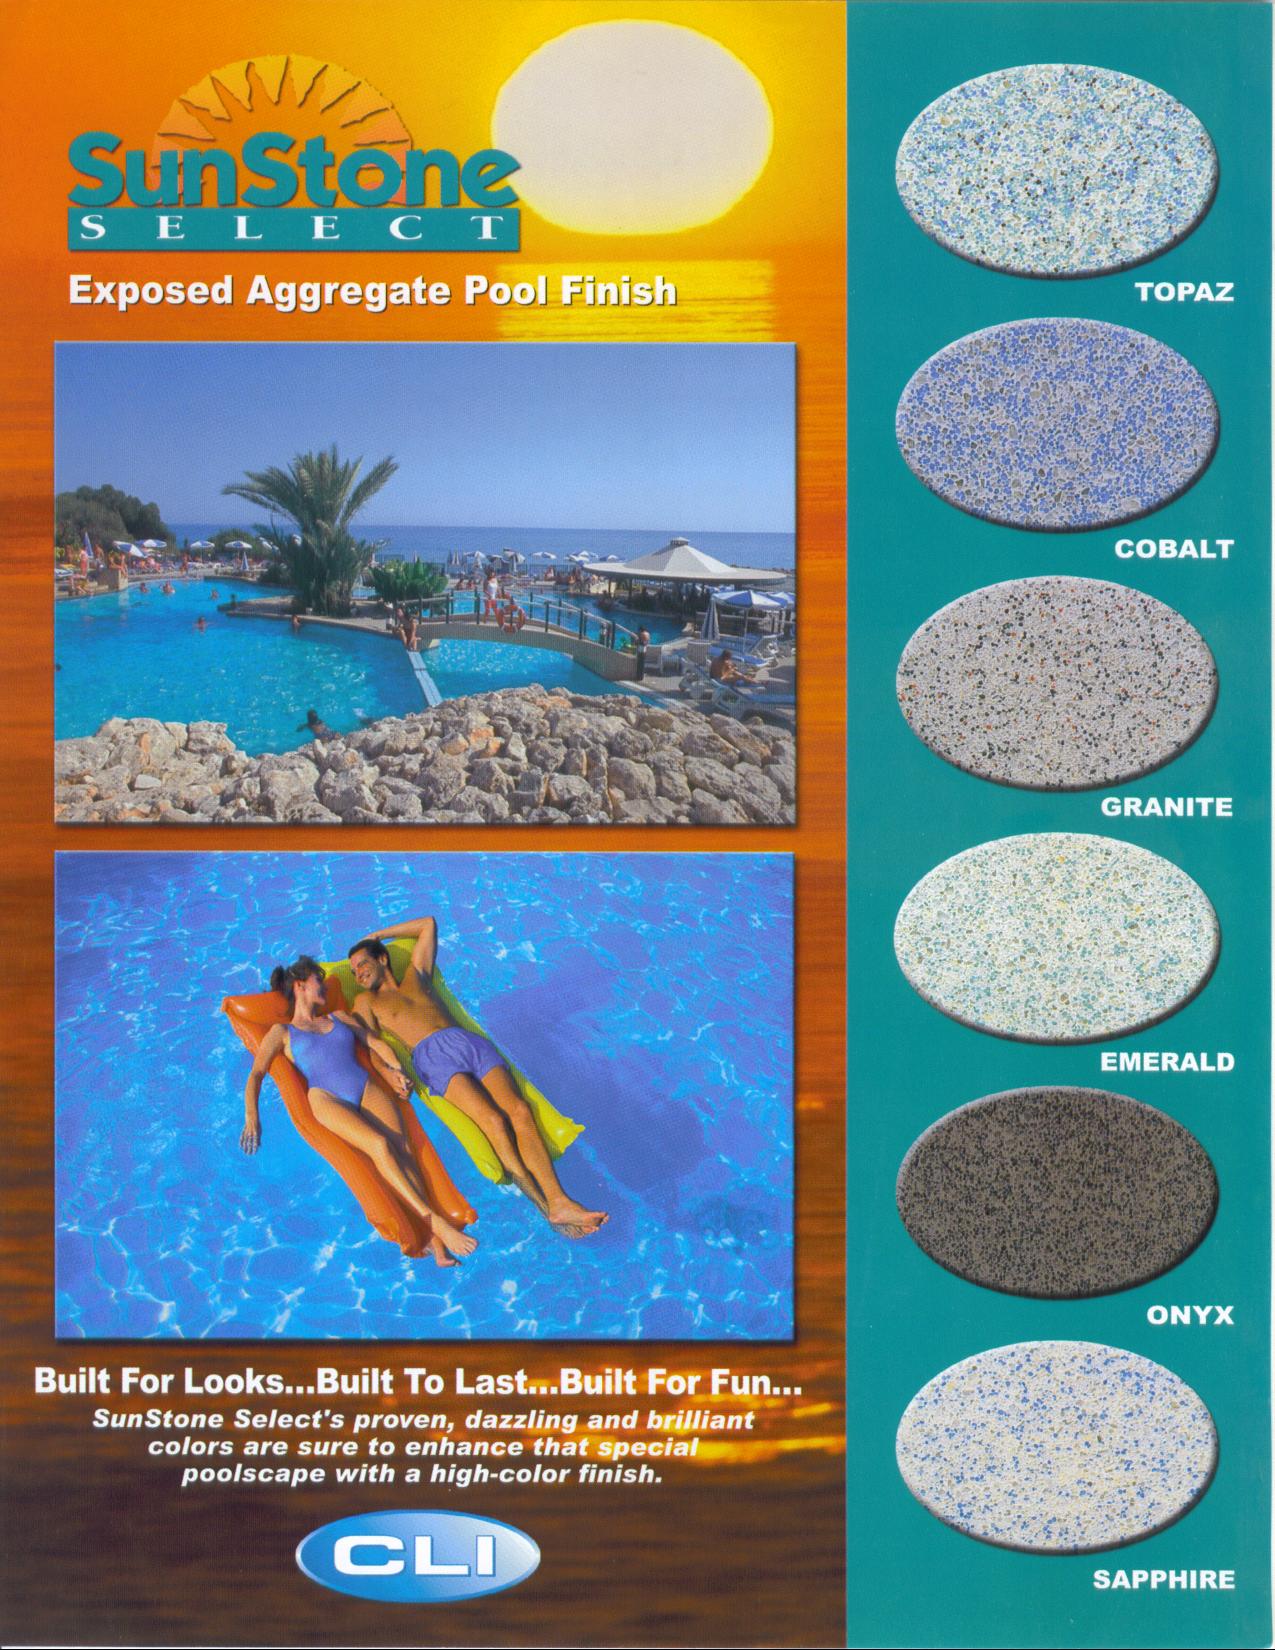 CL Sunstone Select Pool Finishes